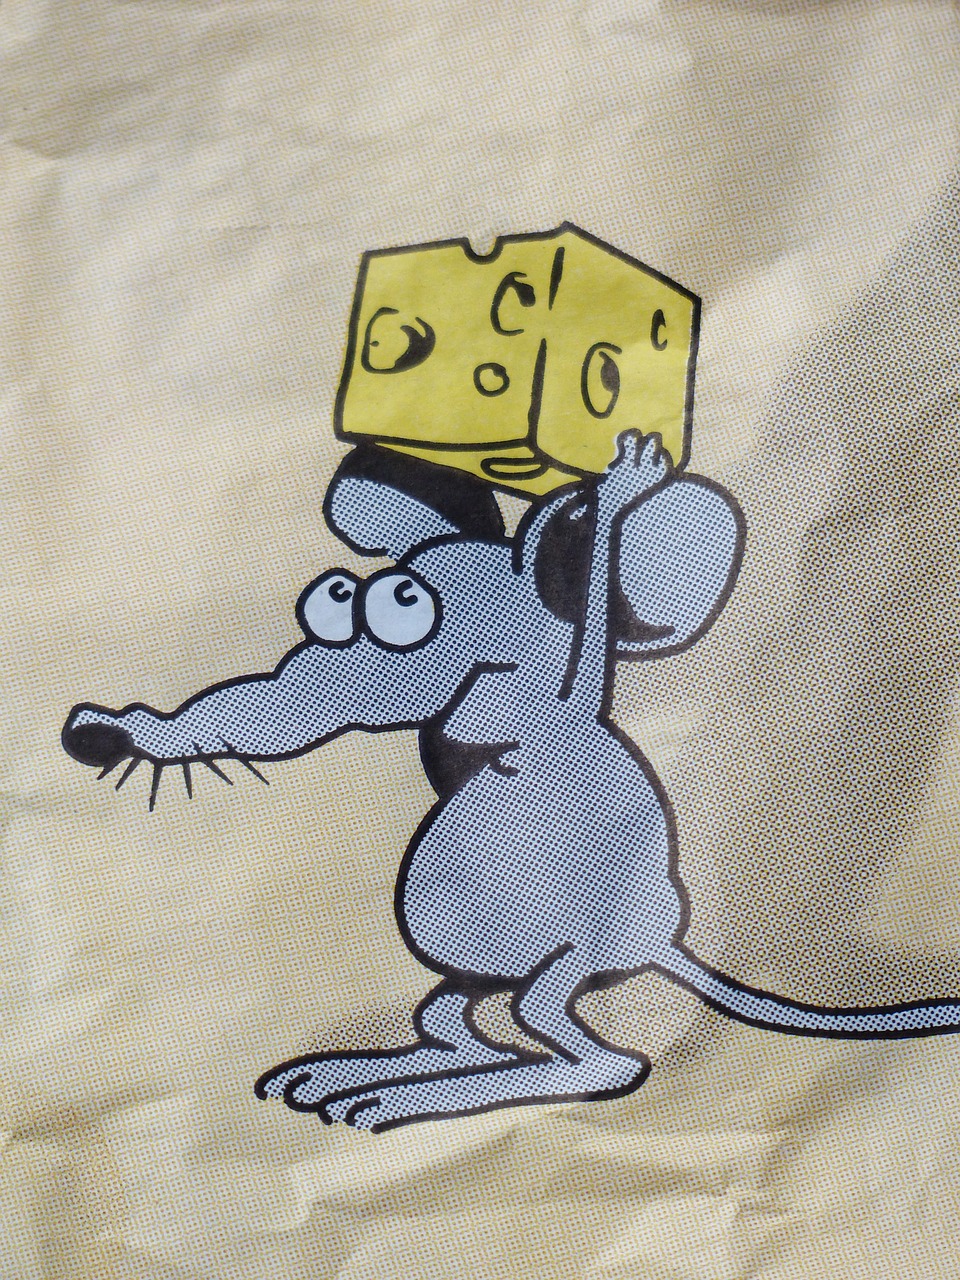 mouse cheese stolen free photo